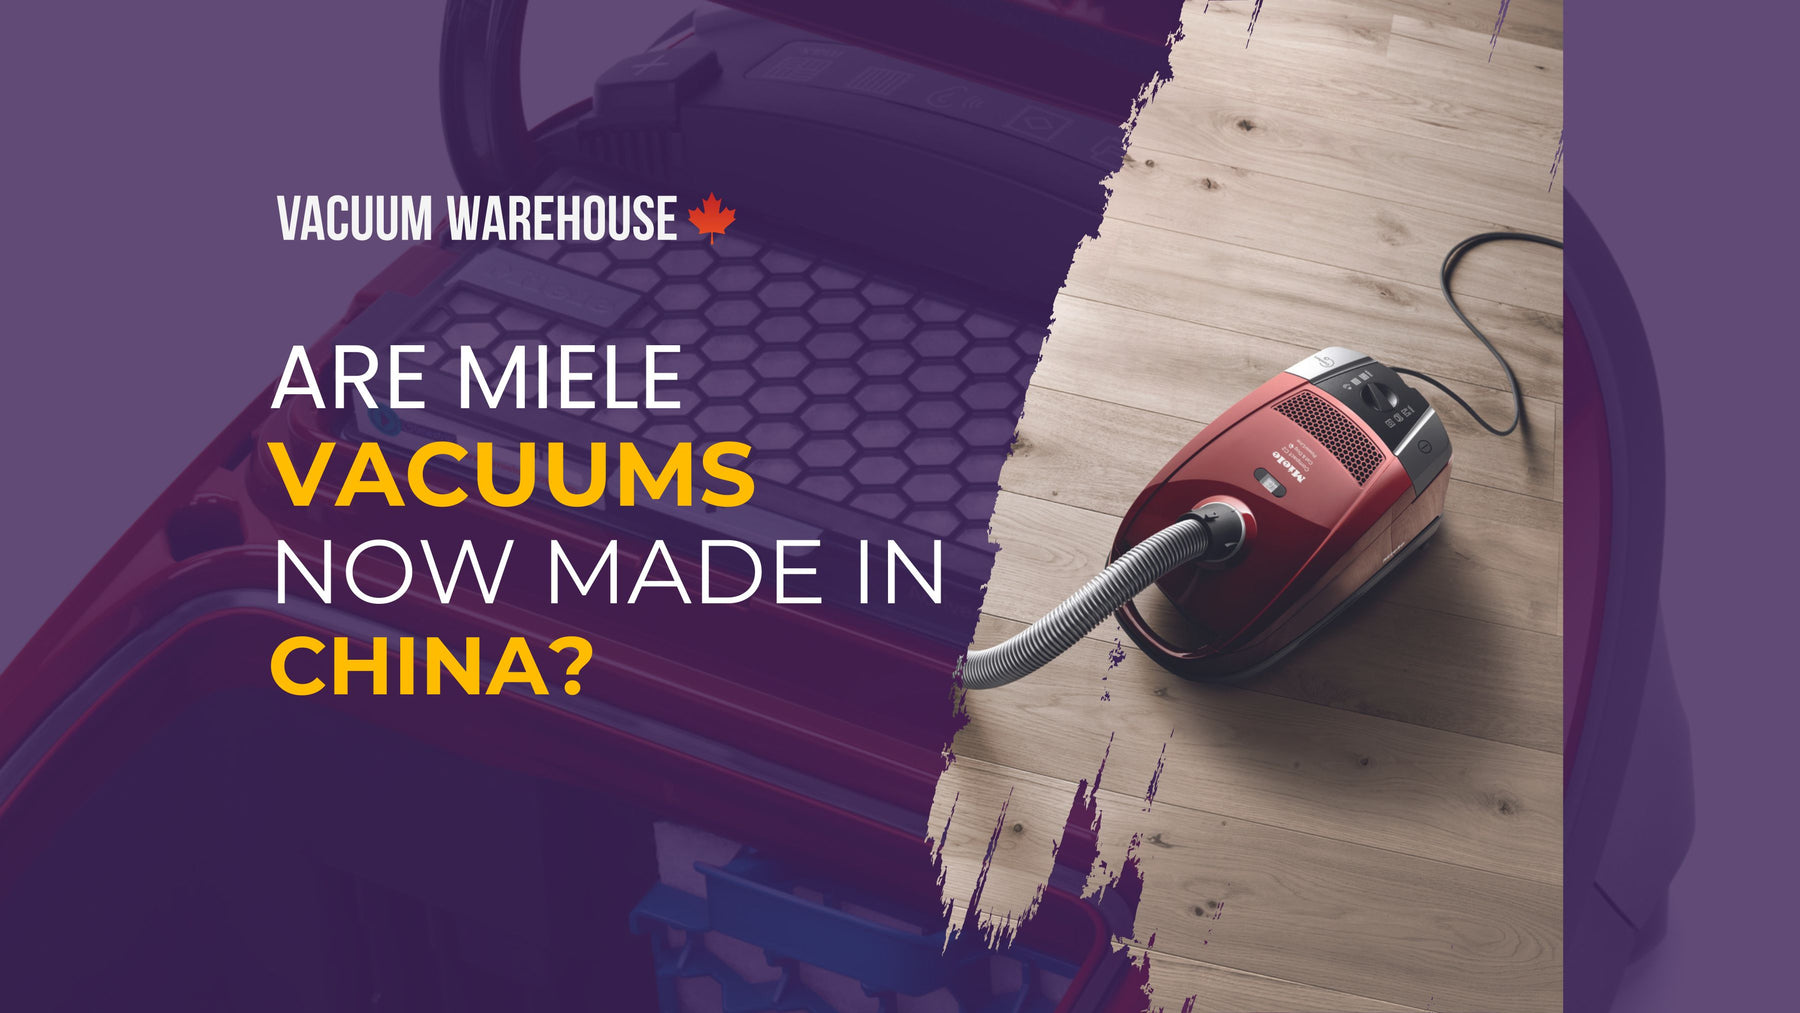 Are Miele vacuums now made in China?